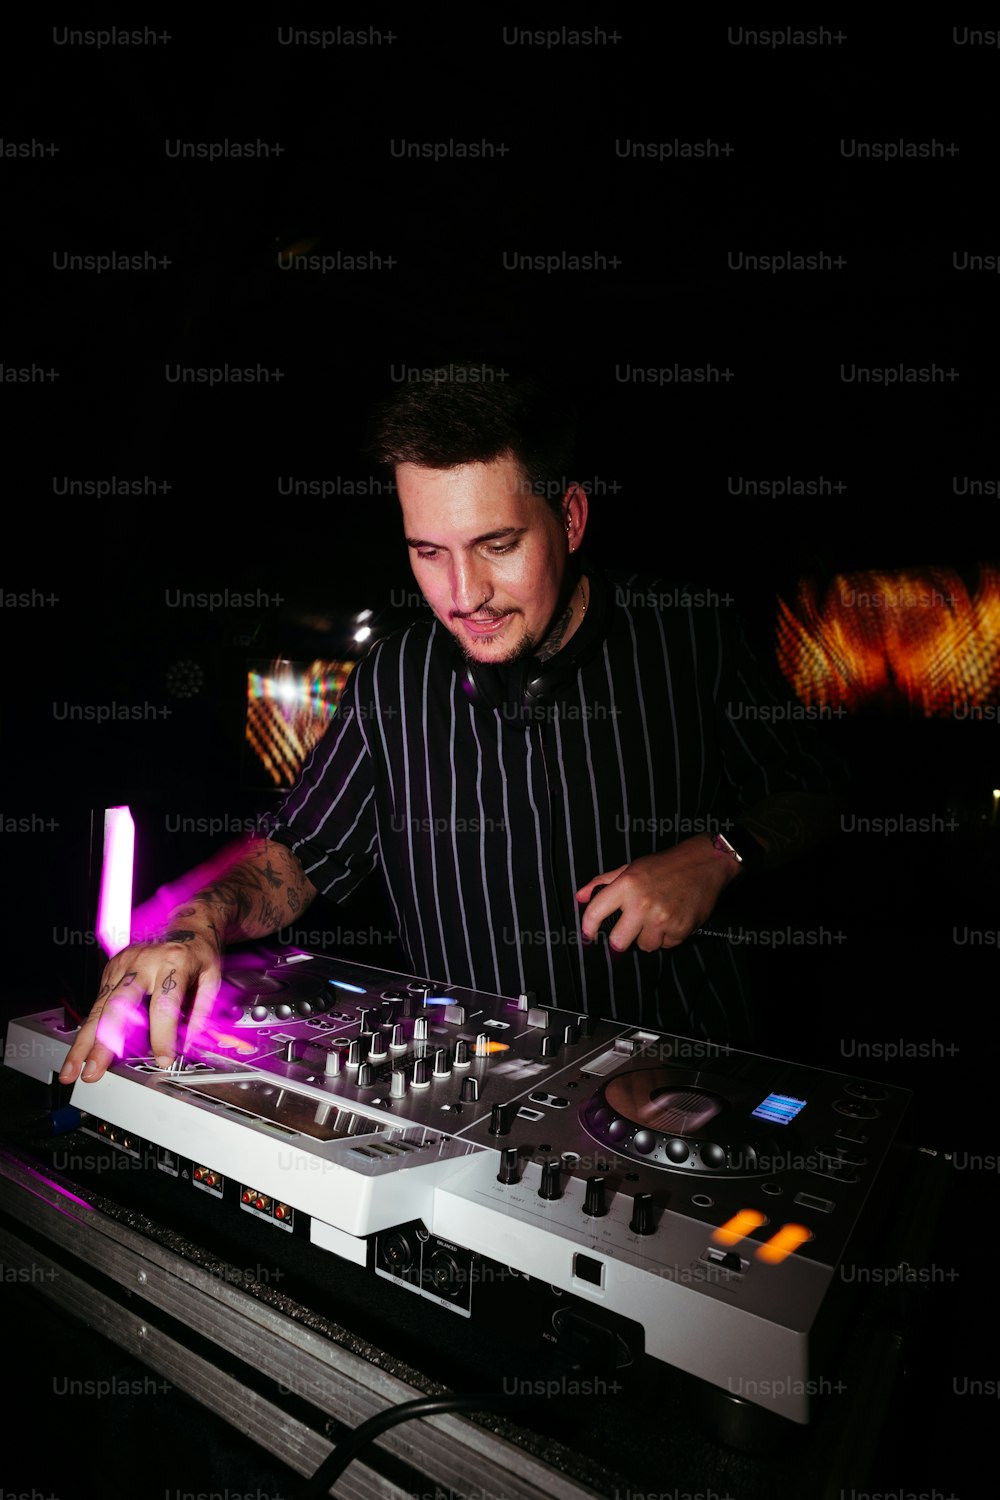 a man in a black and white striped shirt mixing music